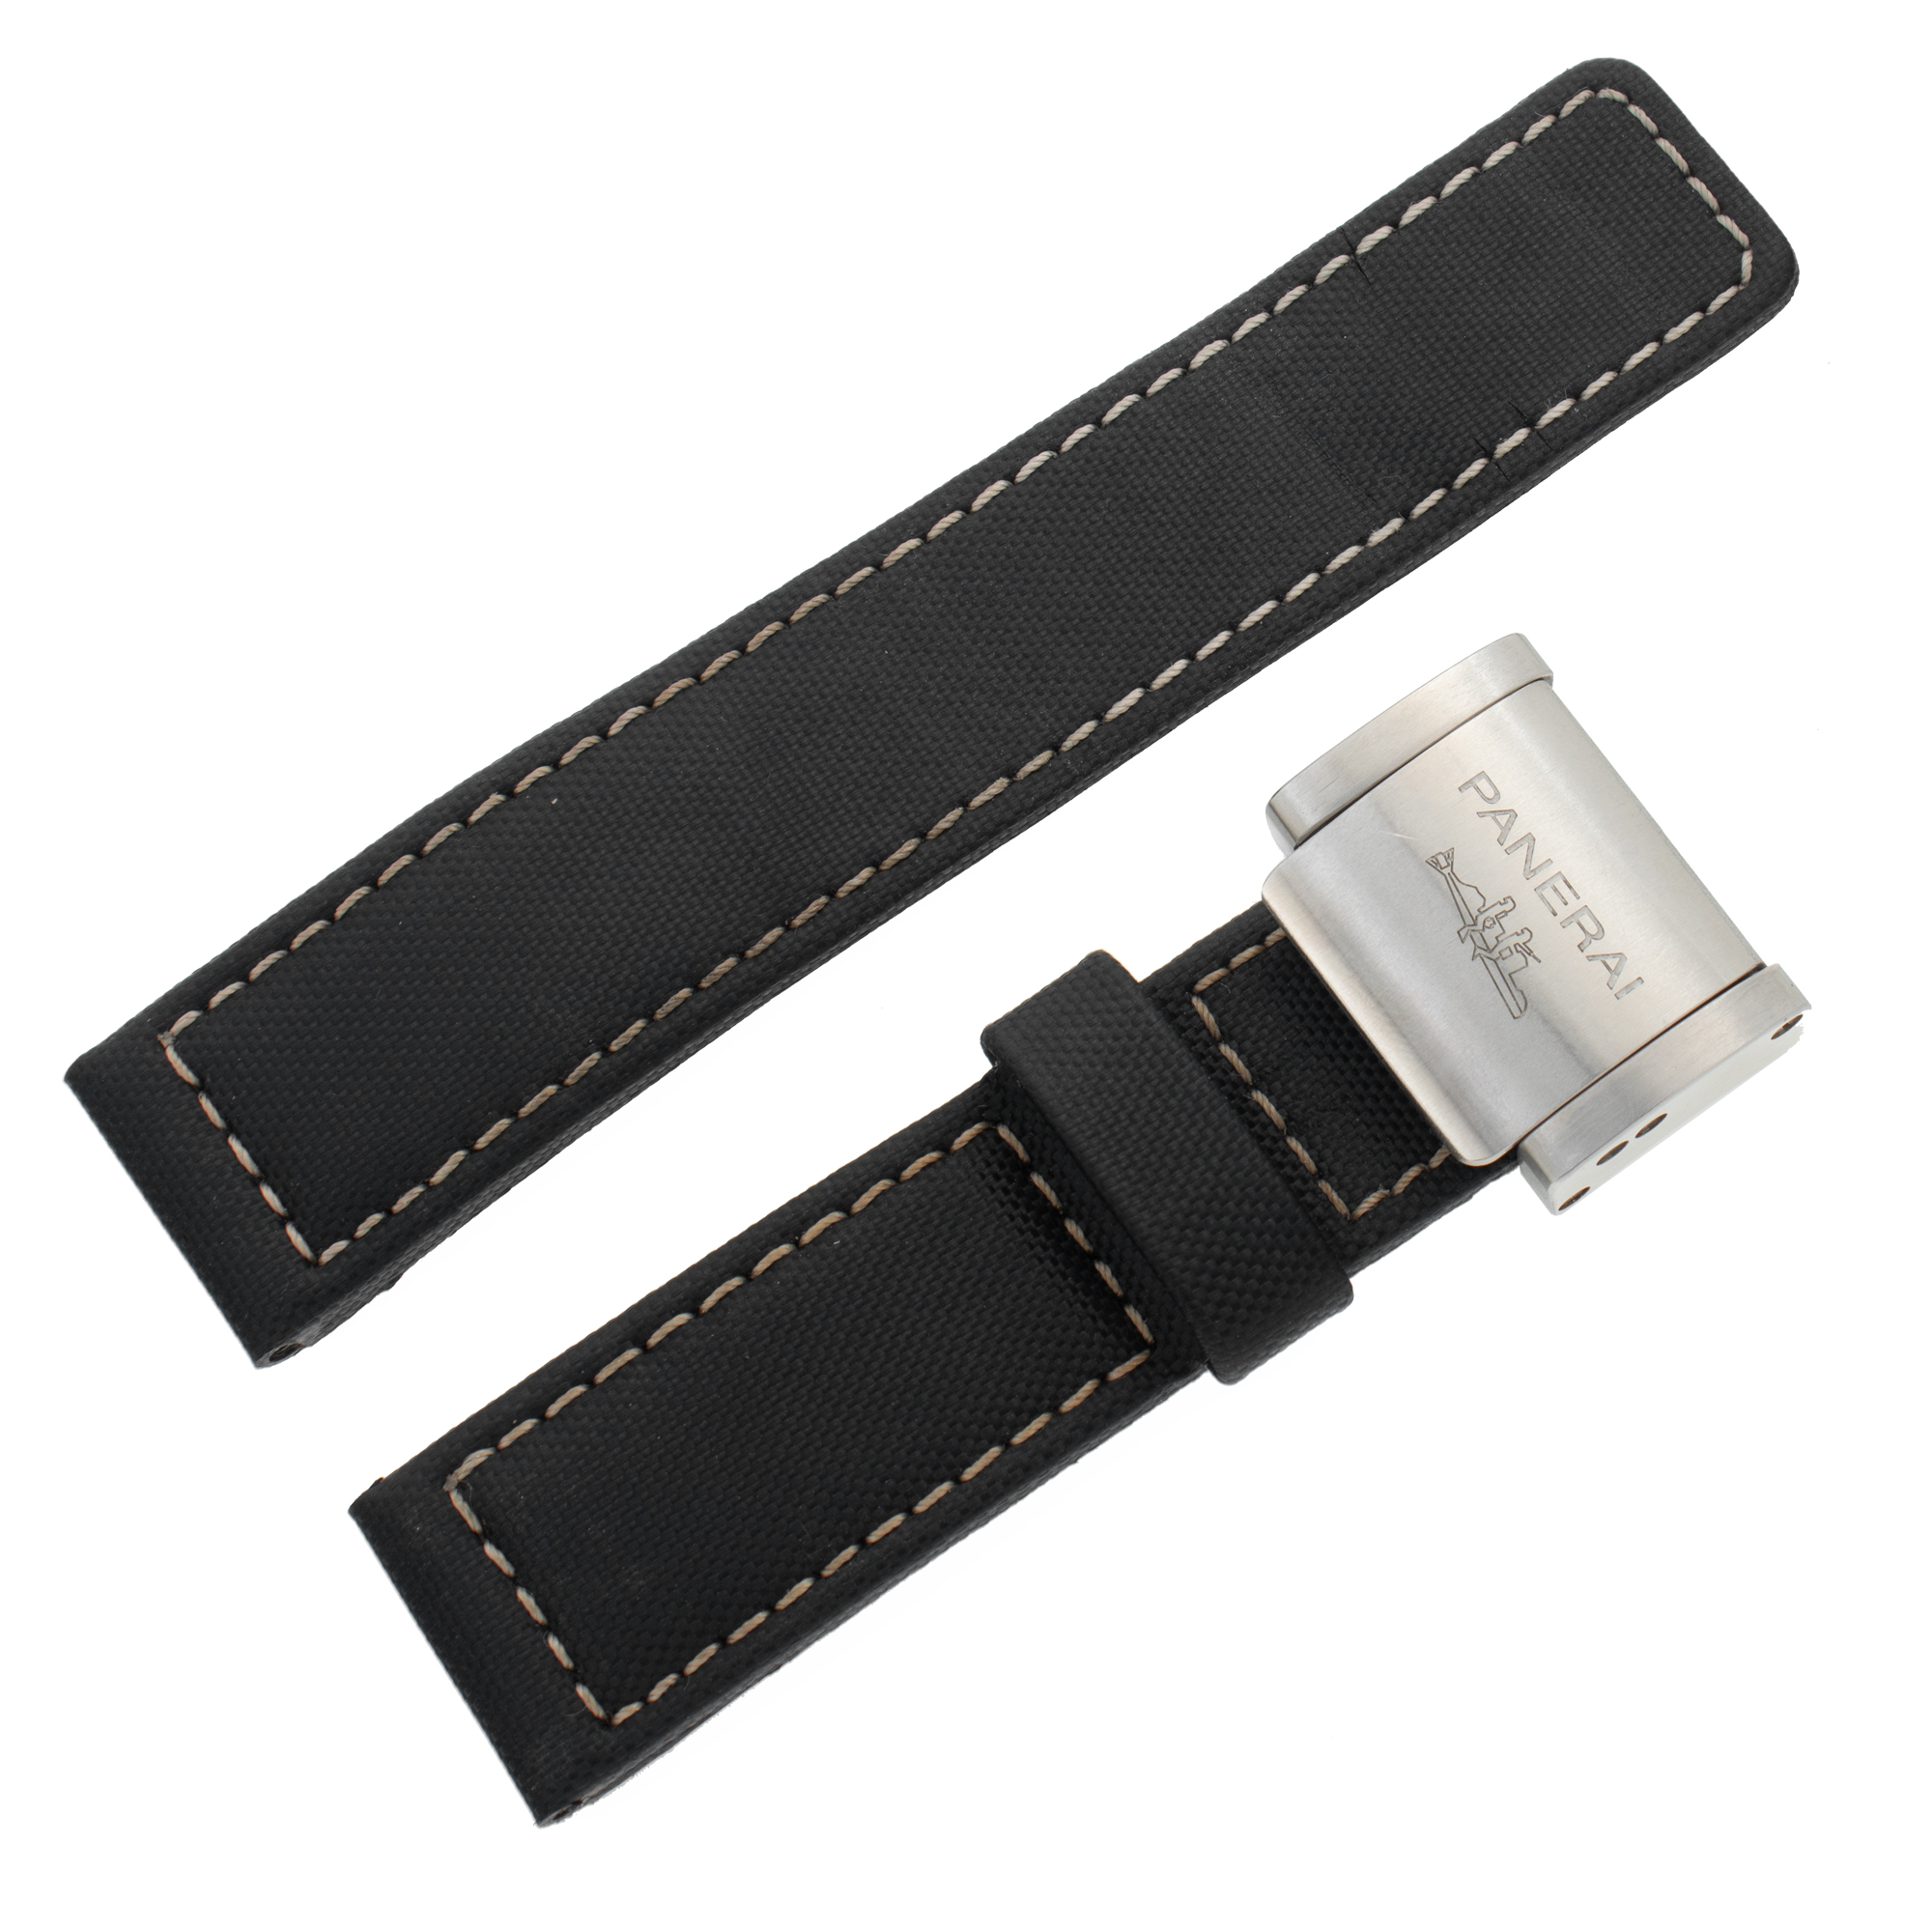 Gently worn Panerai fabric strap with stainless steel Panerai clasp buckle